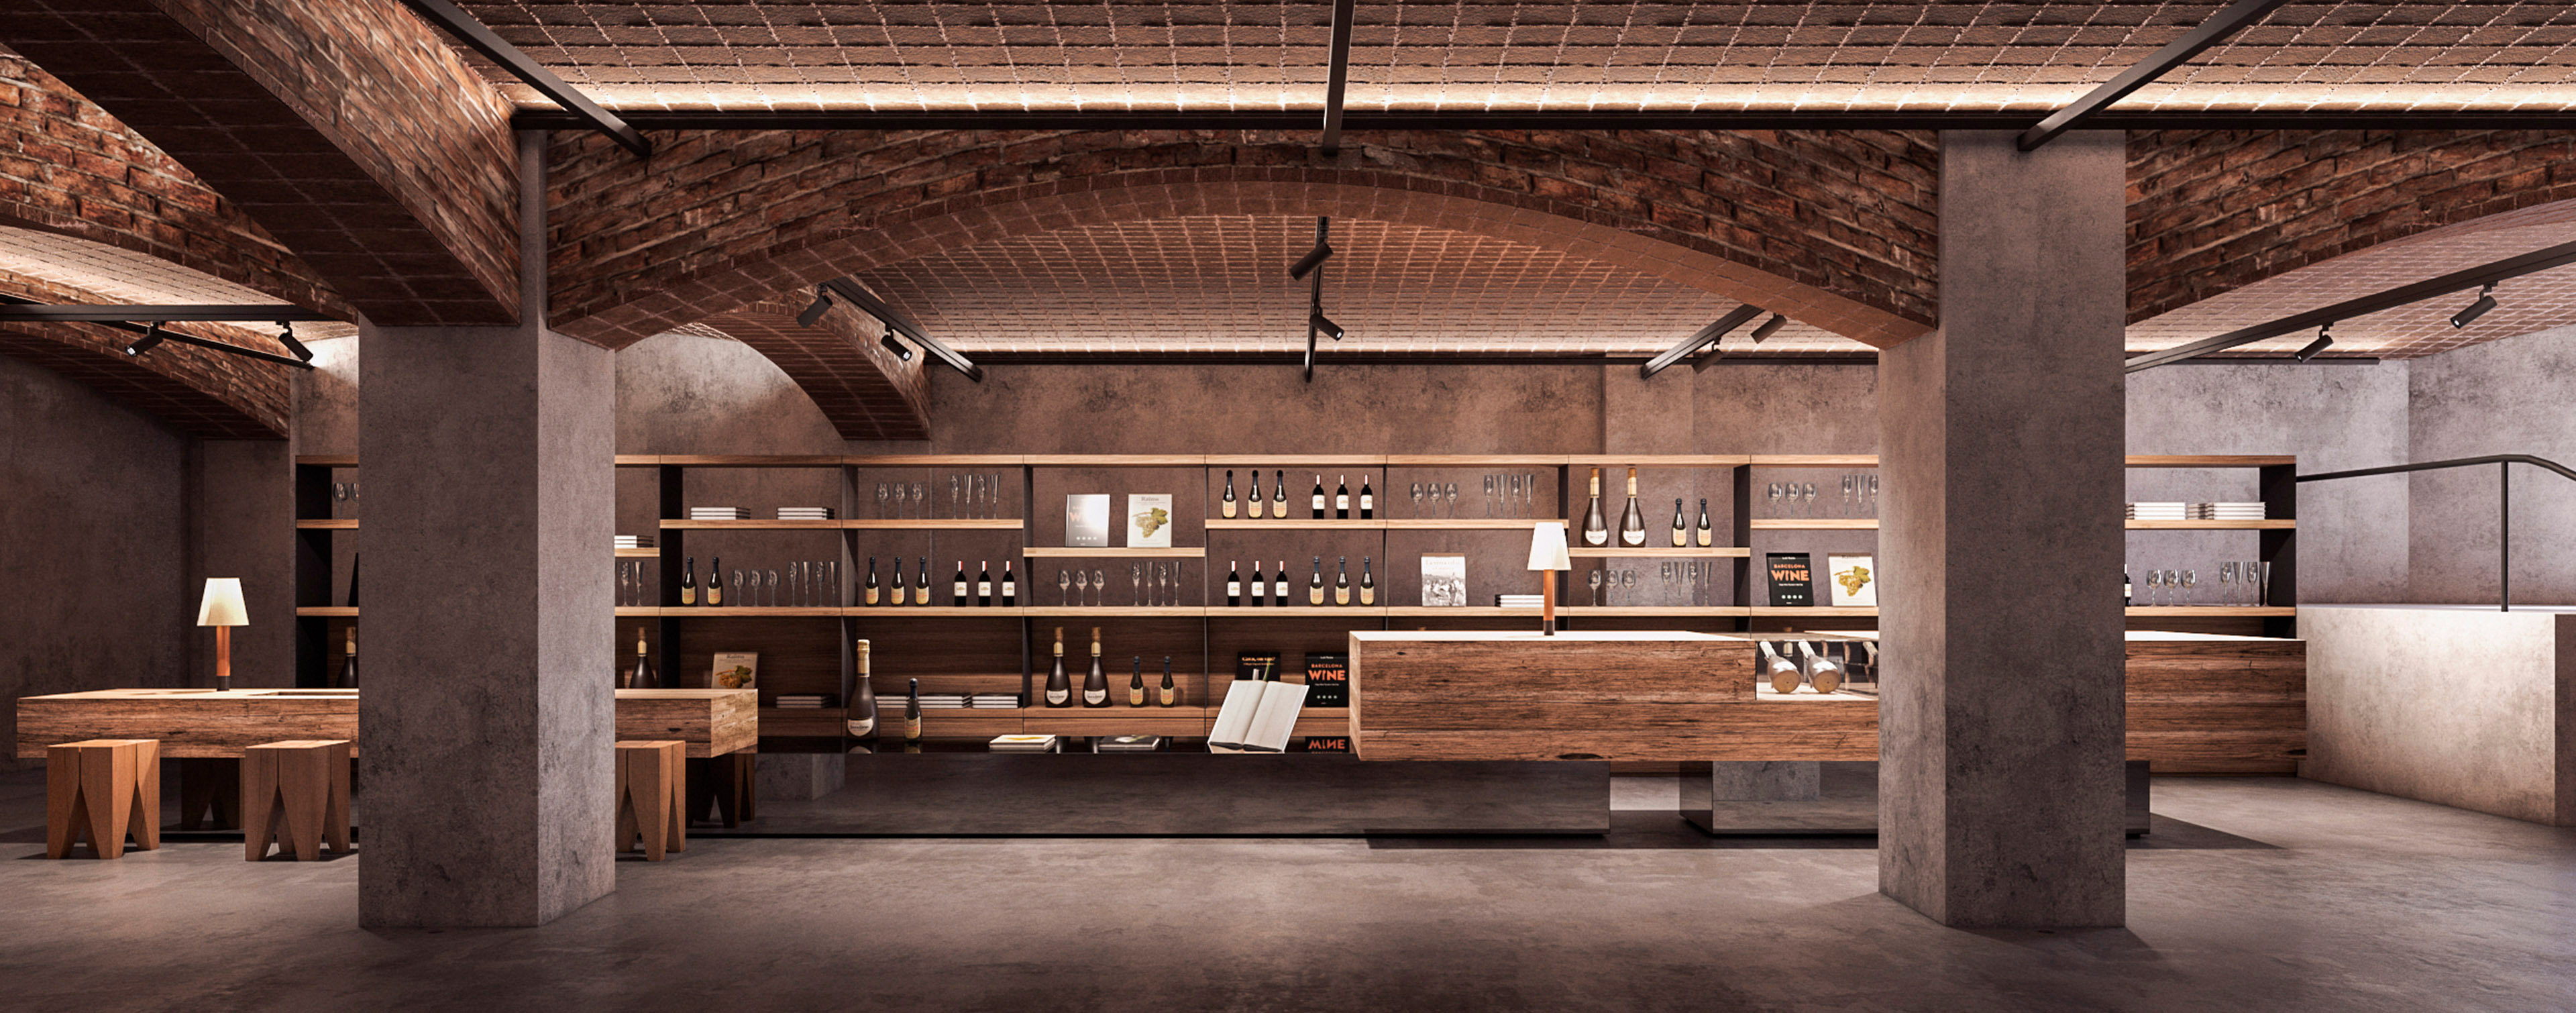 luv studio luxury architects santsadurni juve y camps winery IMG 01 - Juve and Camps Winery